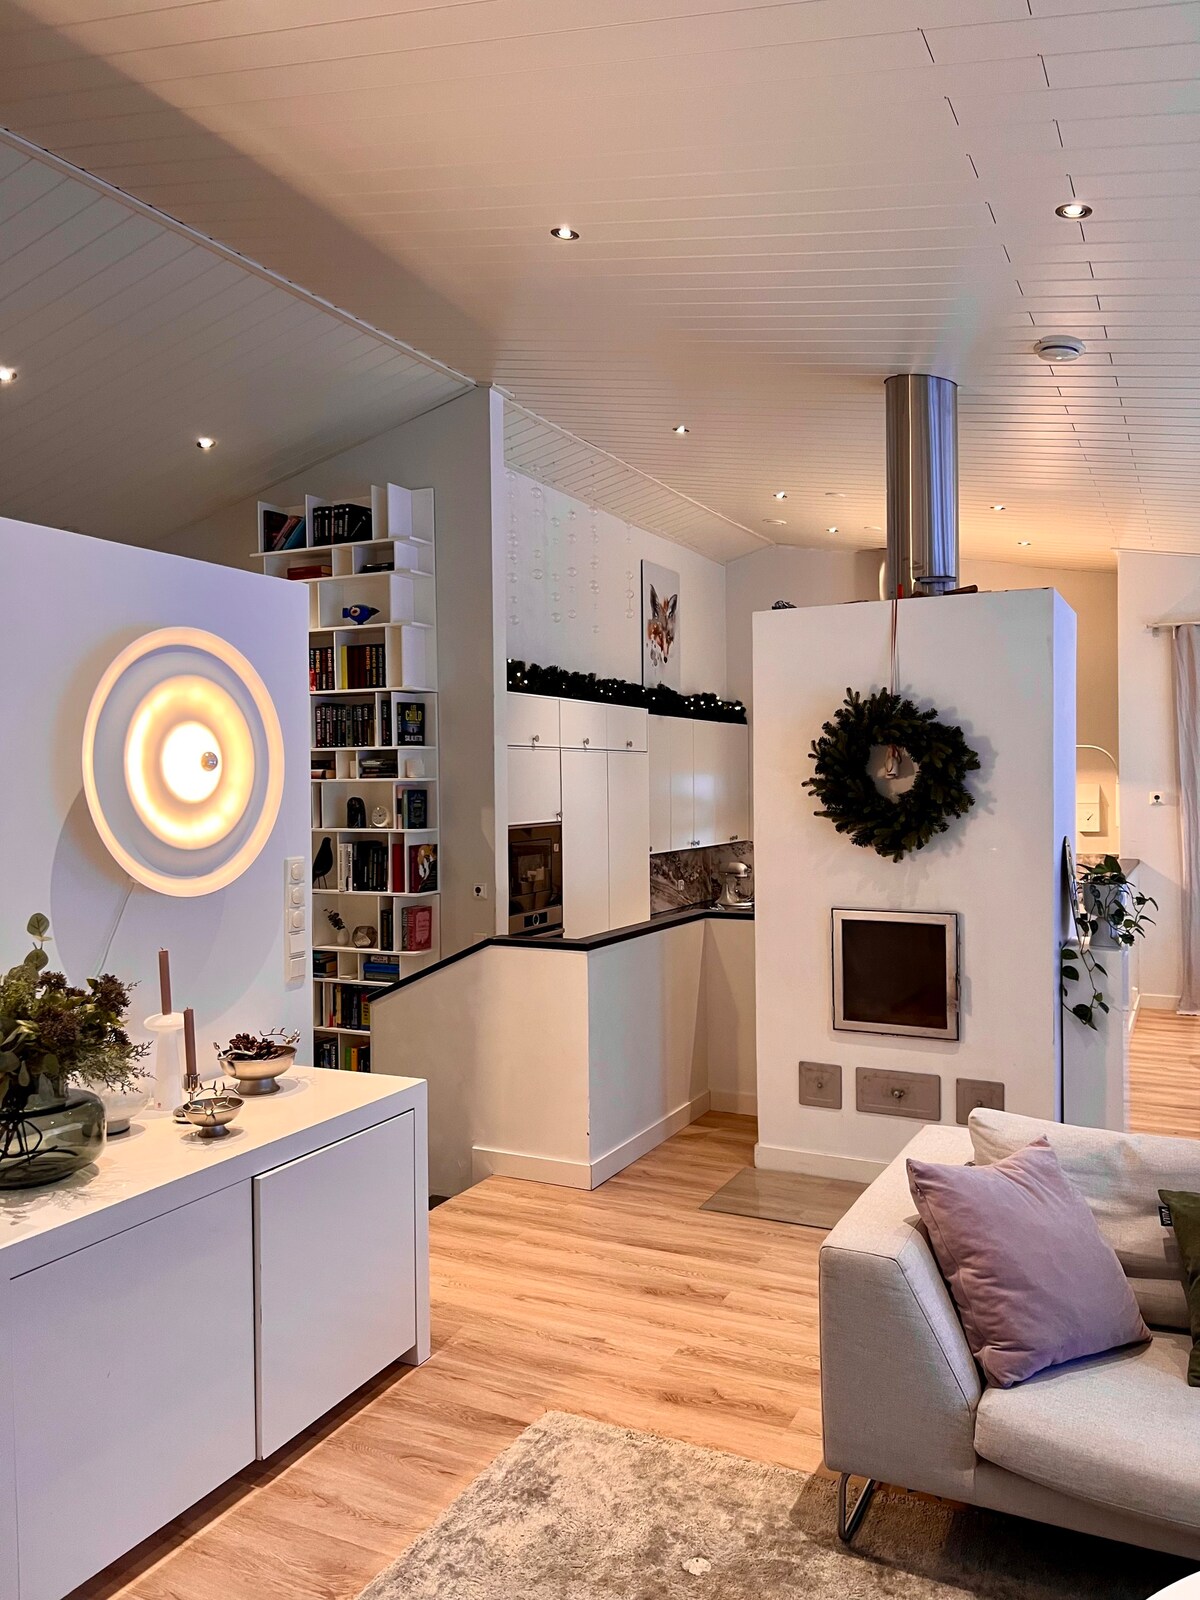 Arctic Circle Home for Winter Holiday